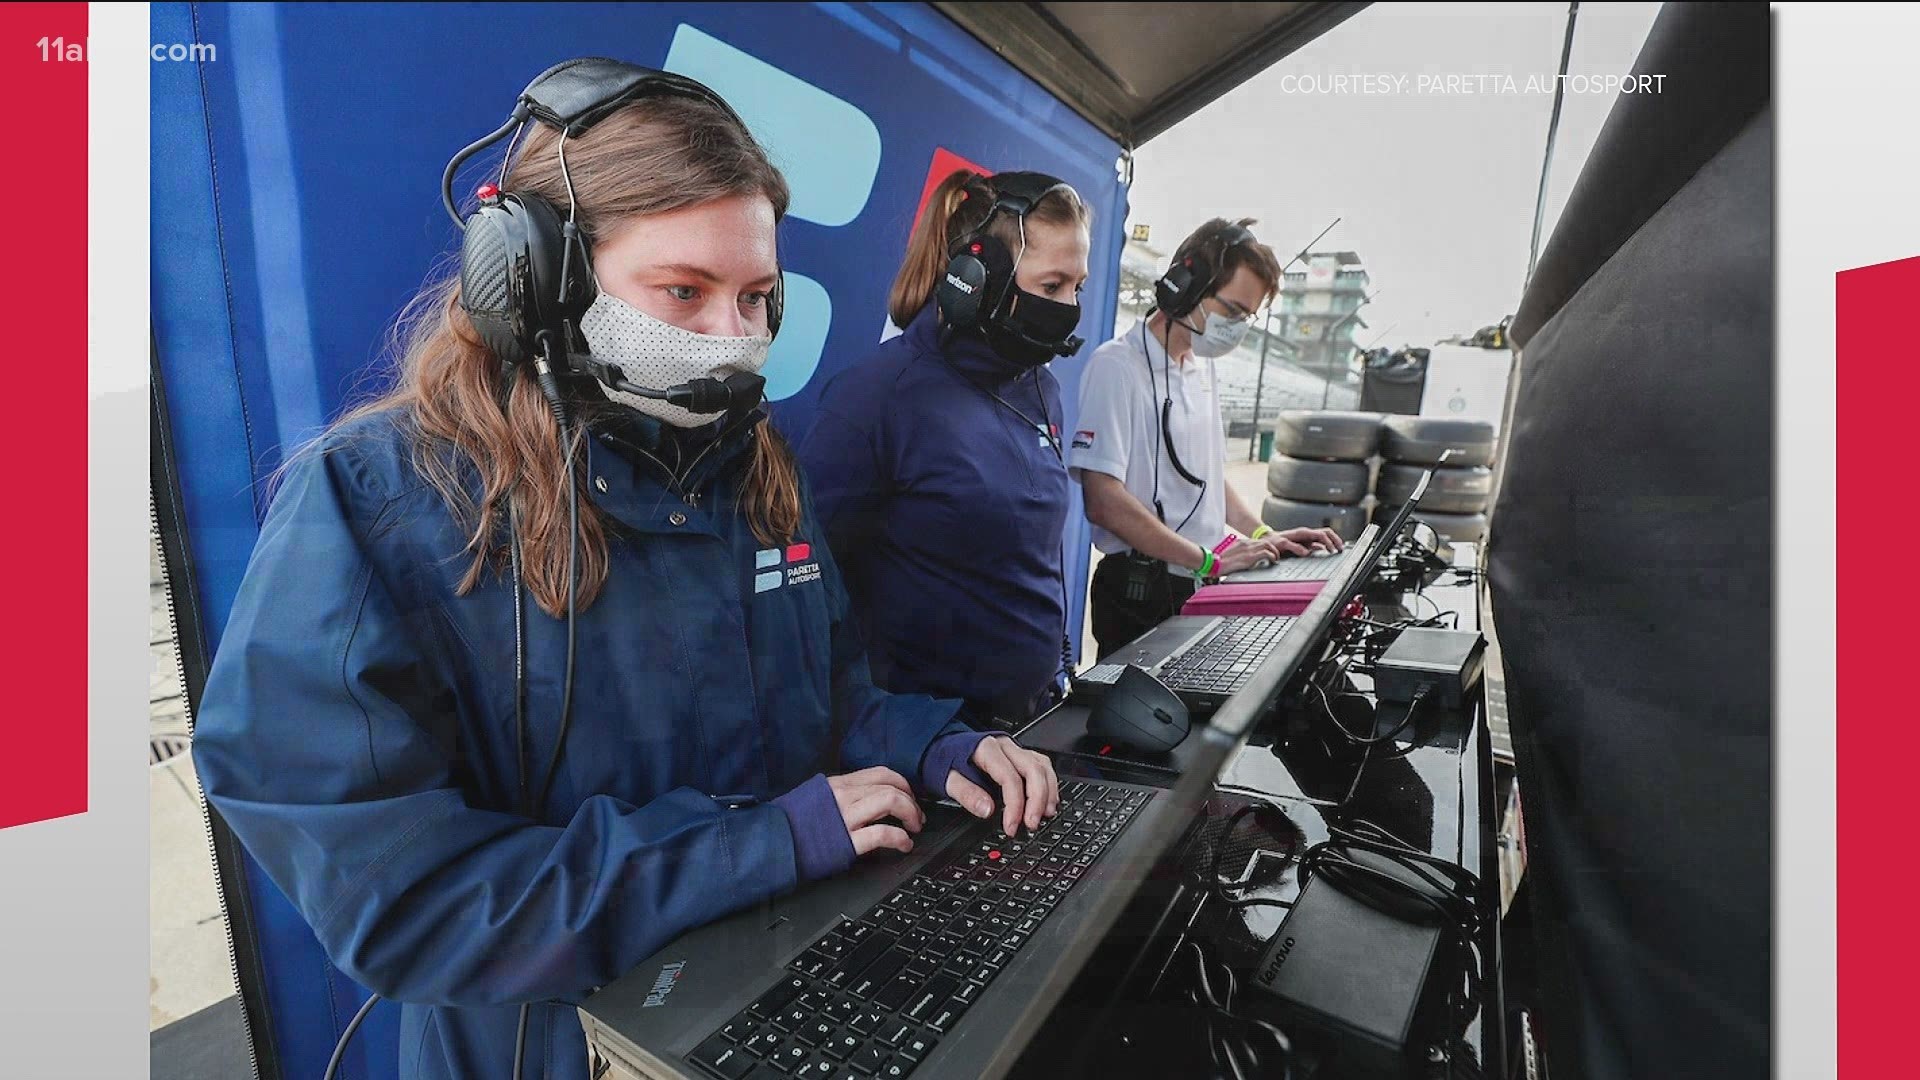 Take a look at her behind the scenes at the Indy 500